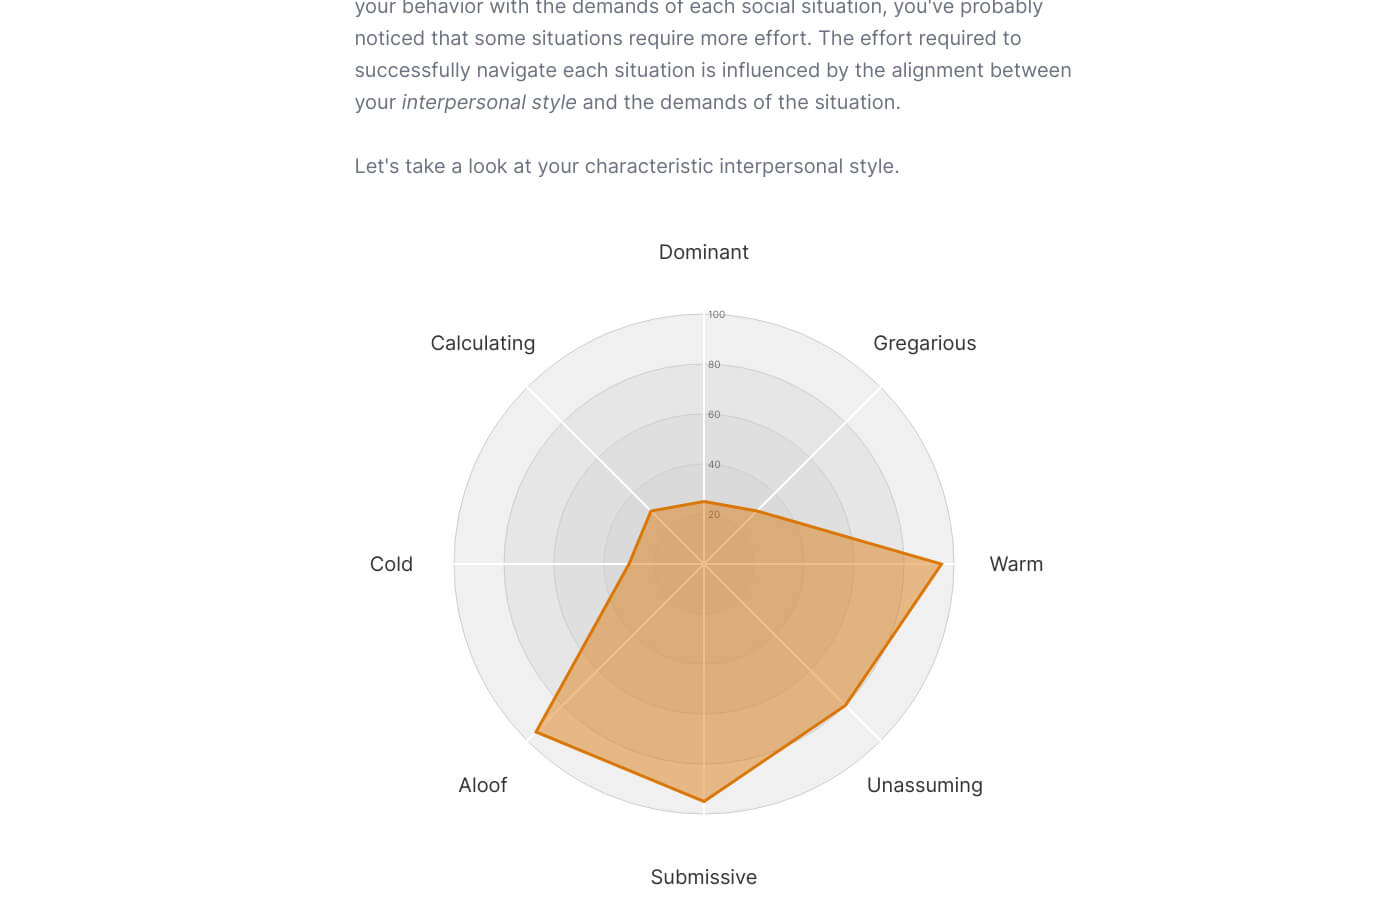 The Enneagram of Personality typology often includes suggestions on how different types relate to each other, but TraitLab describes your unique interpersonal style that influences social interactions with most people.